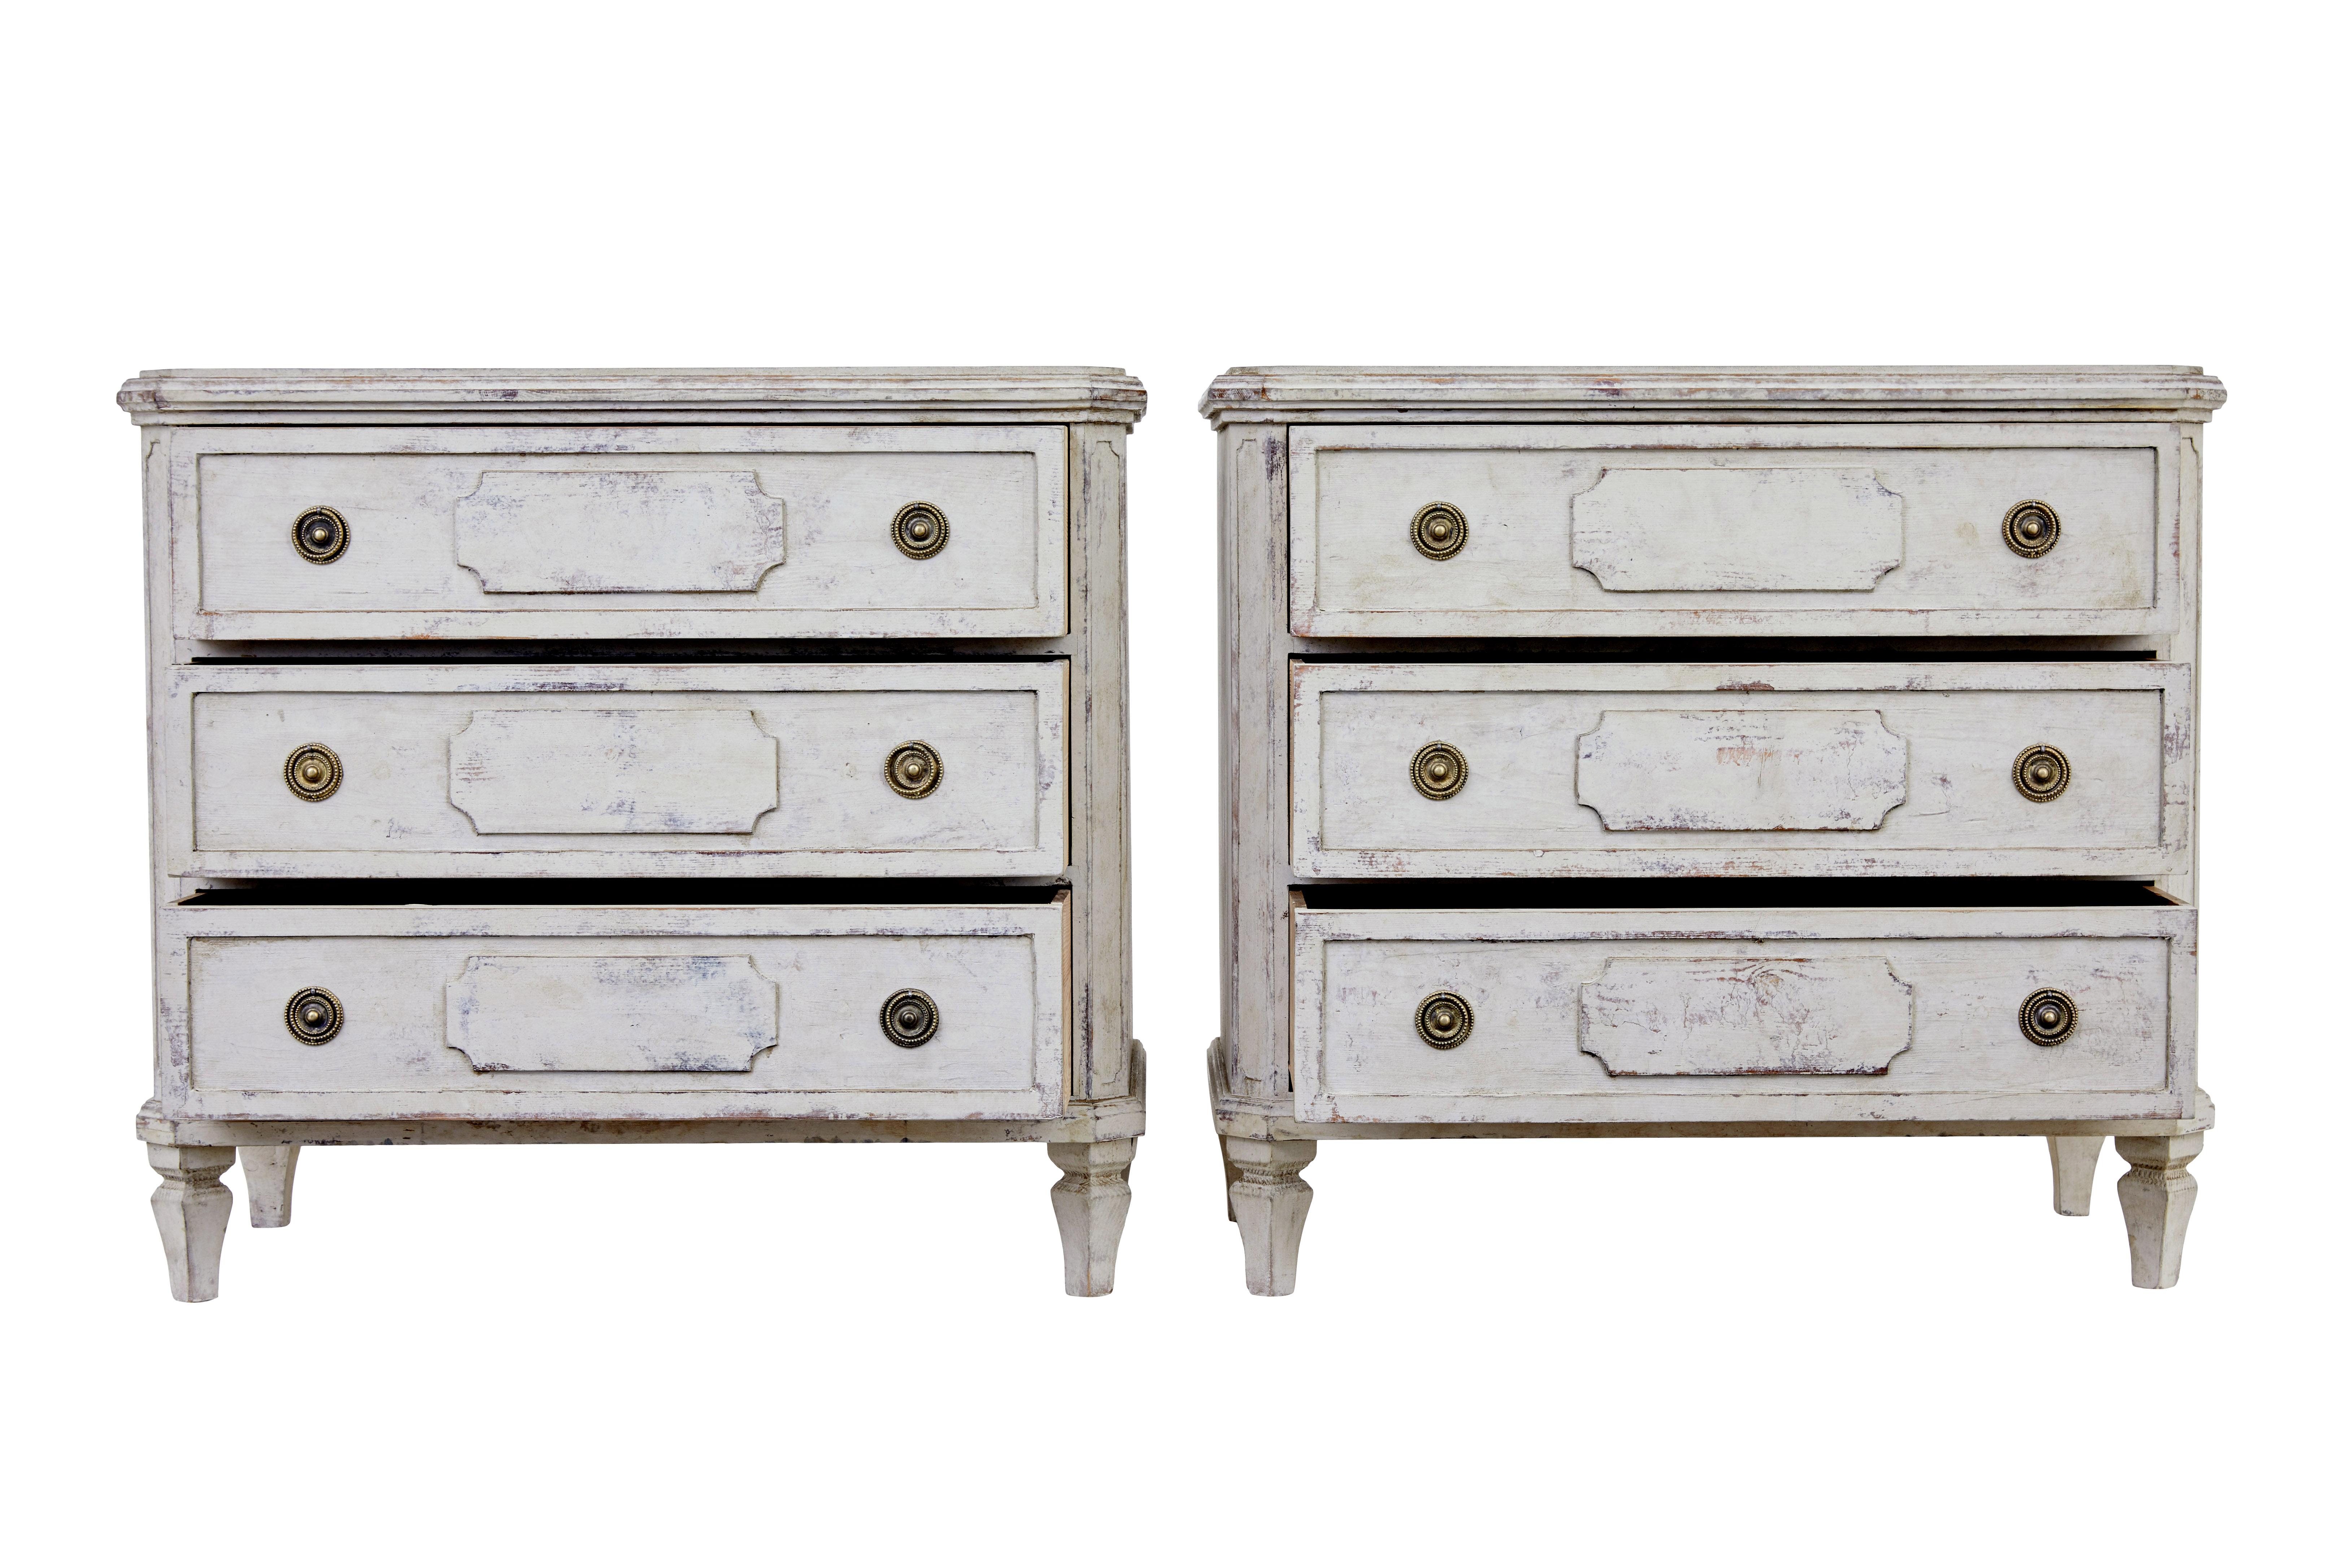 Pair of swedish painted 19th century commodes circa 1880.

Good quality pair of chest of drawers, each fitted with 3 drawers and hand painted in a faded light green colour.

Plain tops with moulded decoration around the edge and canted corners. 